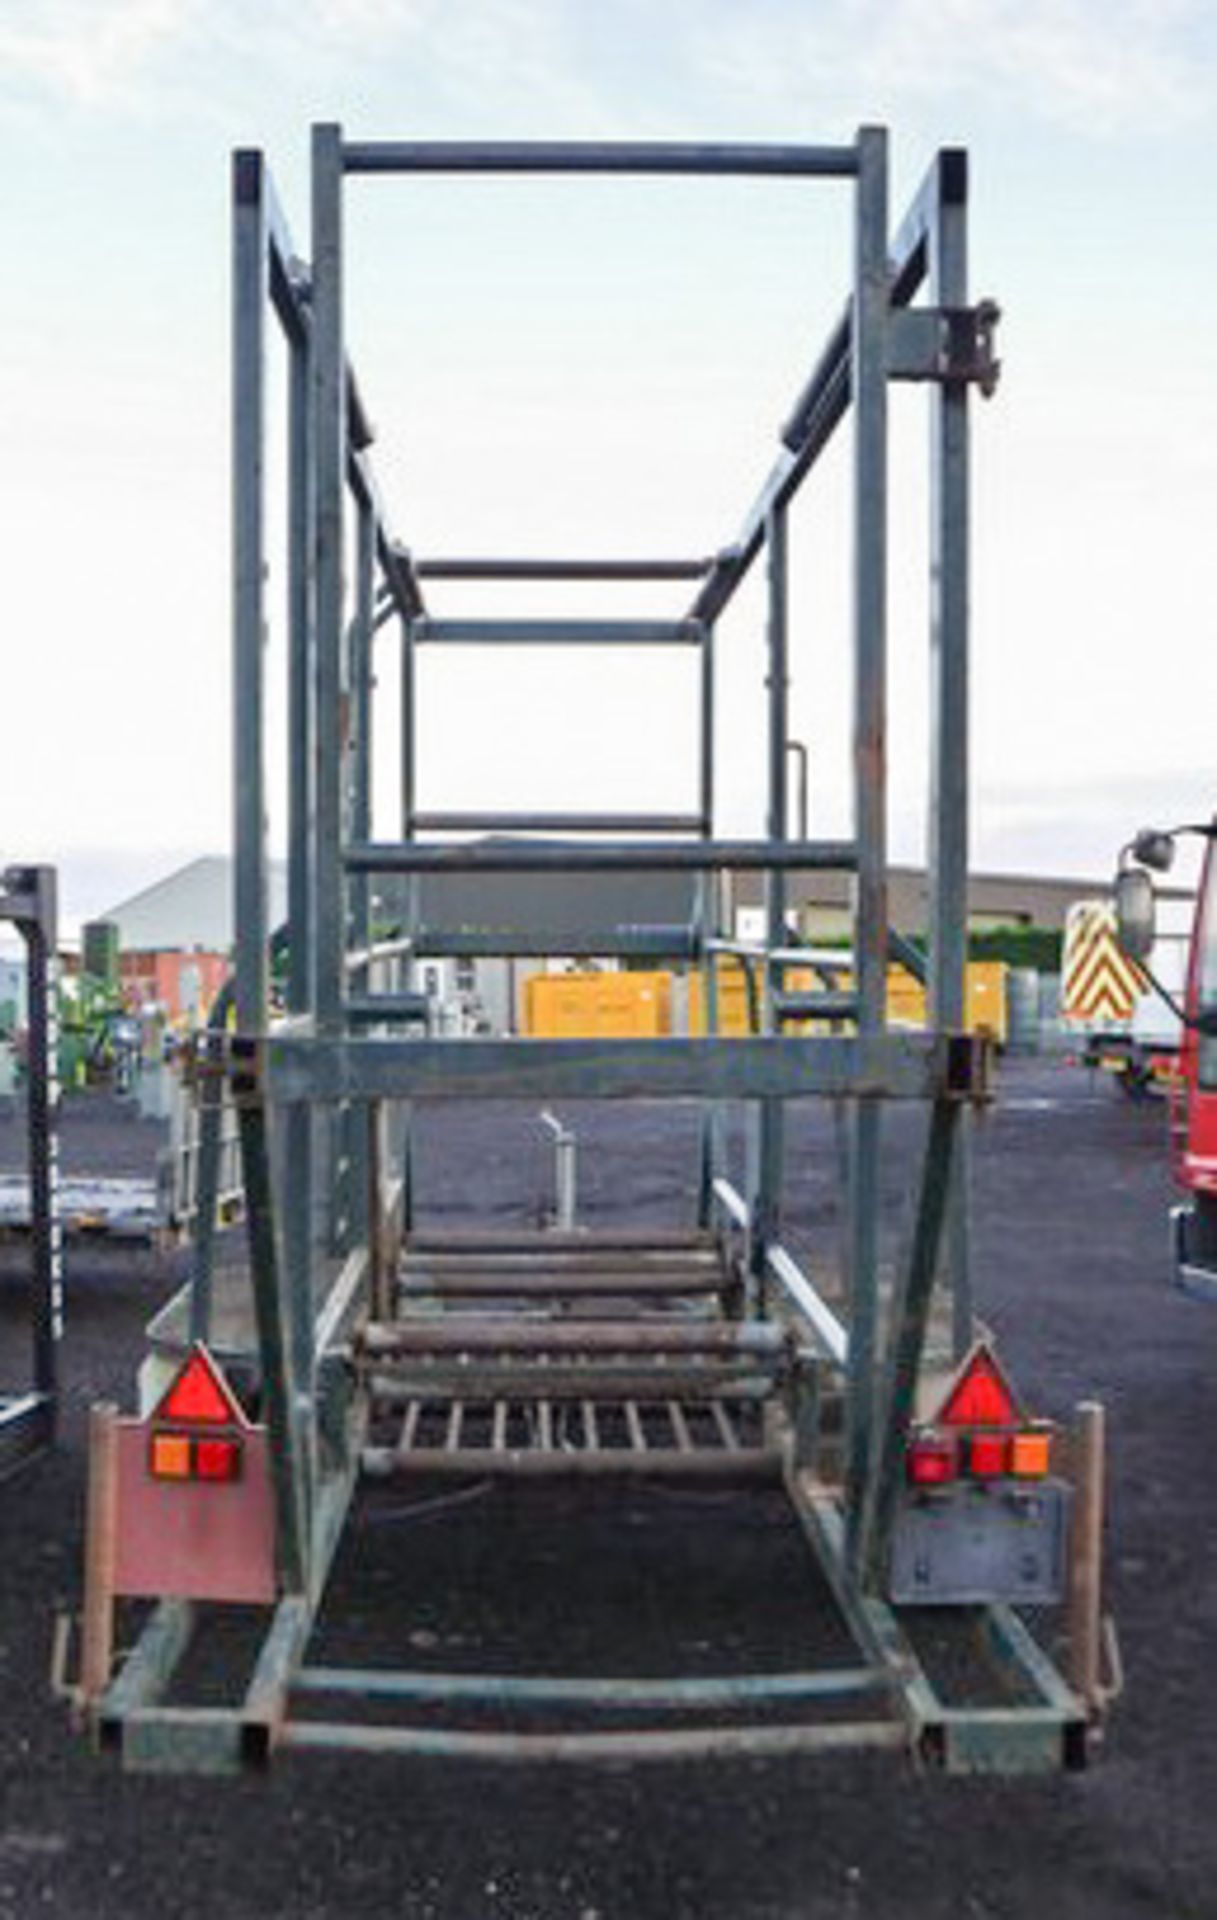 COIL CARRYING TRAILER BRAKED AND LED LIGHTS - Image 3 of 5